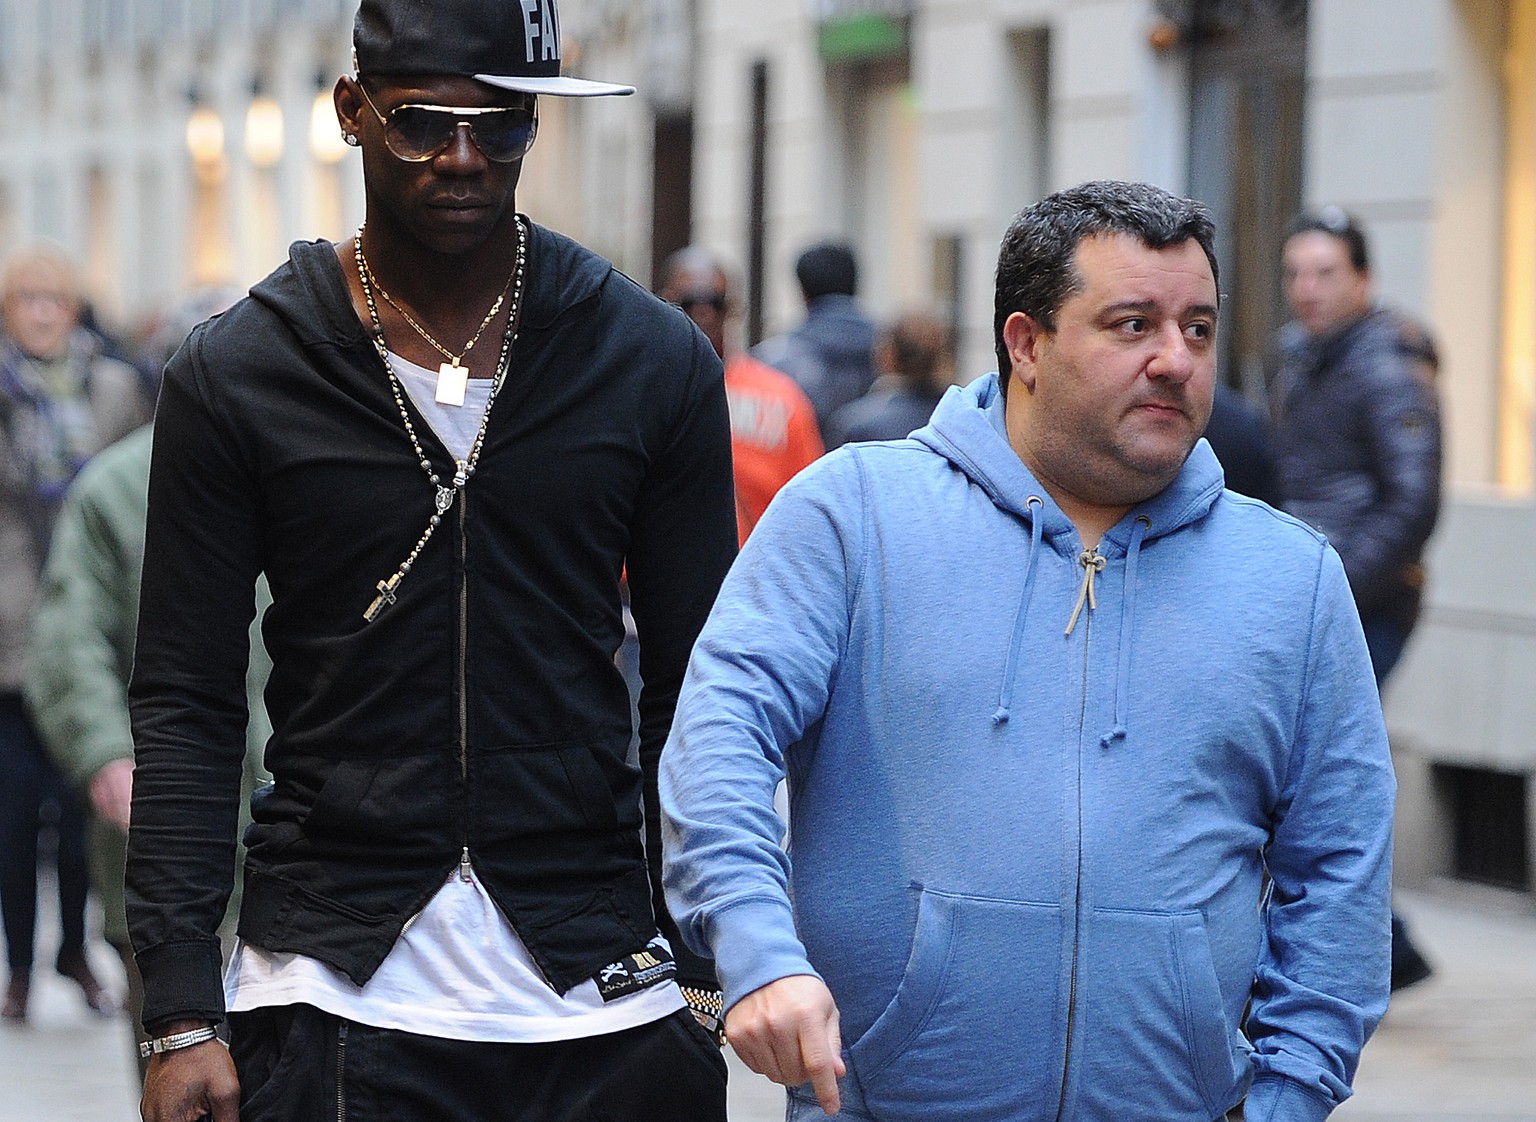 MILAN, ITALY - MARCH 05: Agent Mino Raiola and Mario balotelli are seen on March 5, 2013 in Milan, Italy. (Photo by Jacopo Raule/Getty Images)